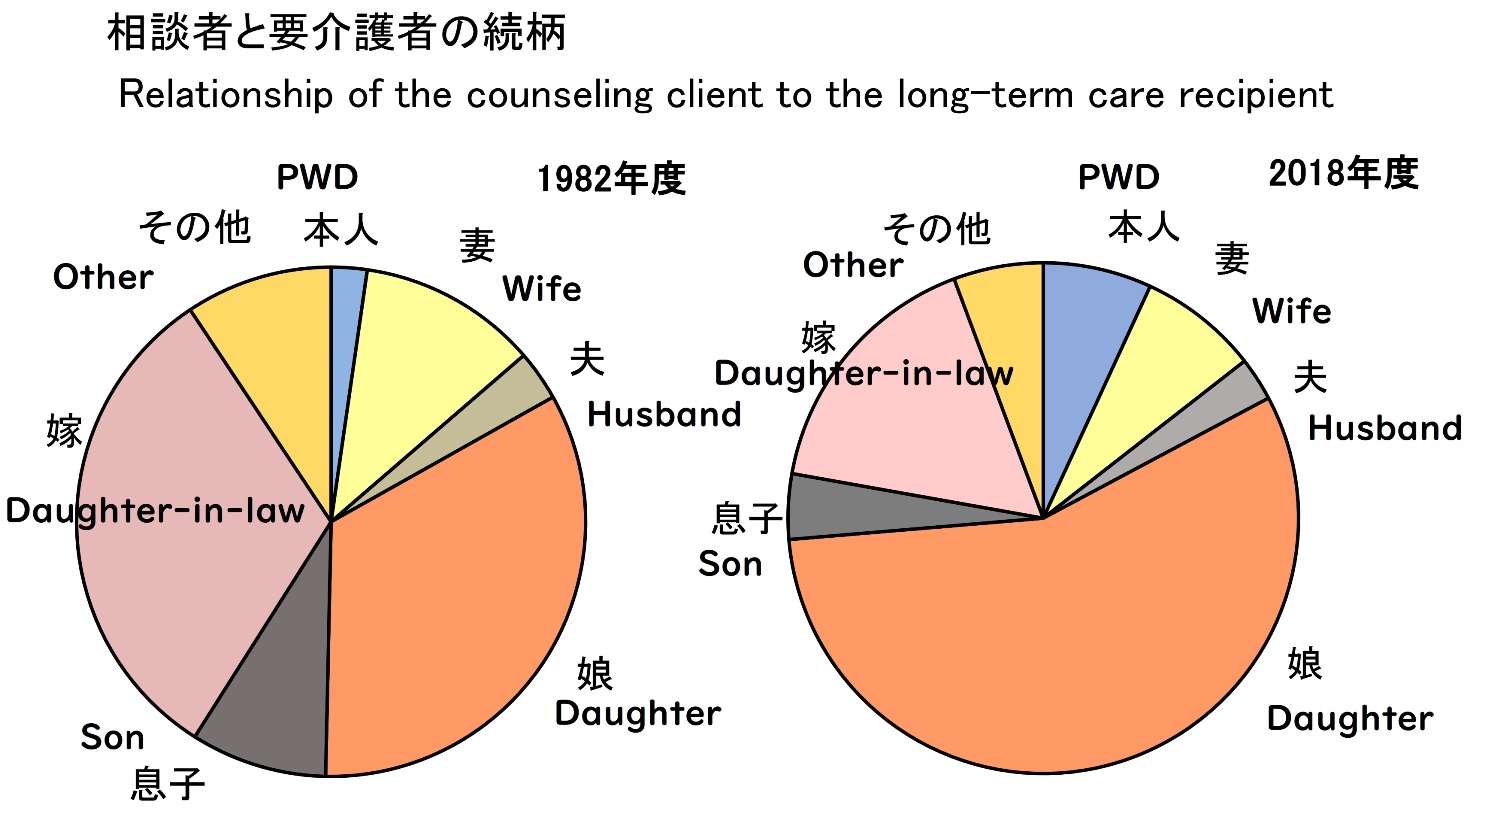 Relationship of the counseling client to the long-term care recipient